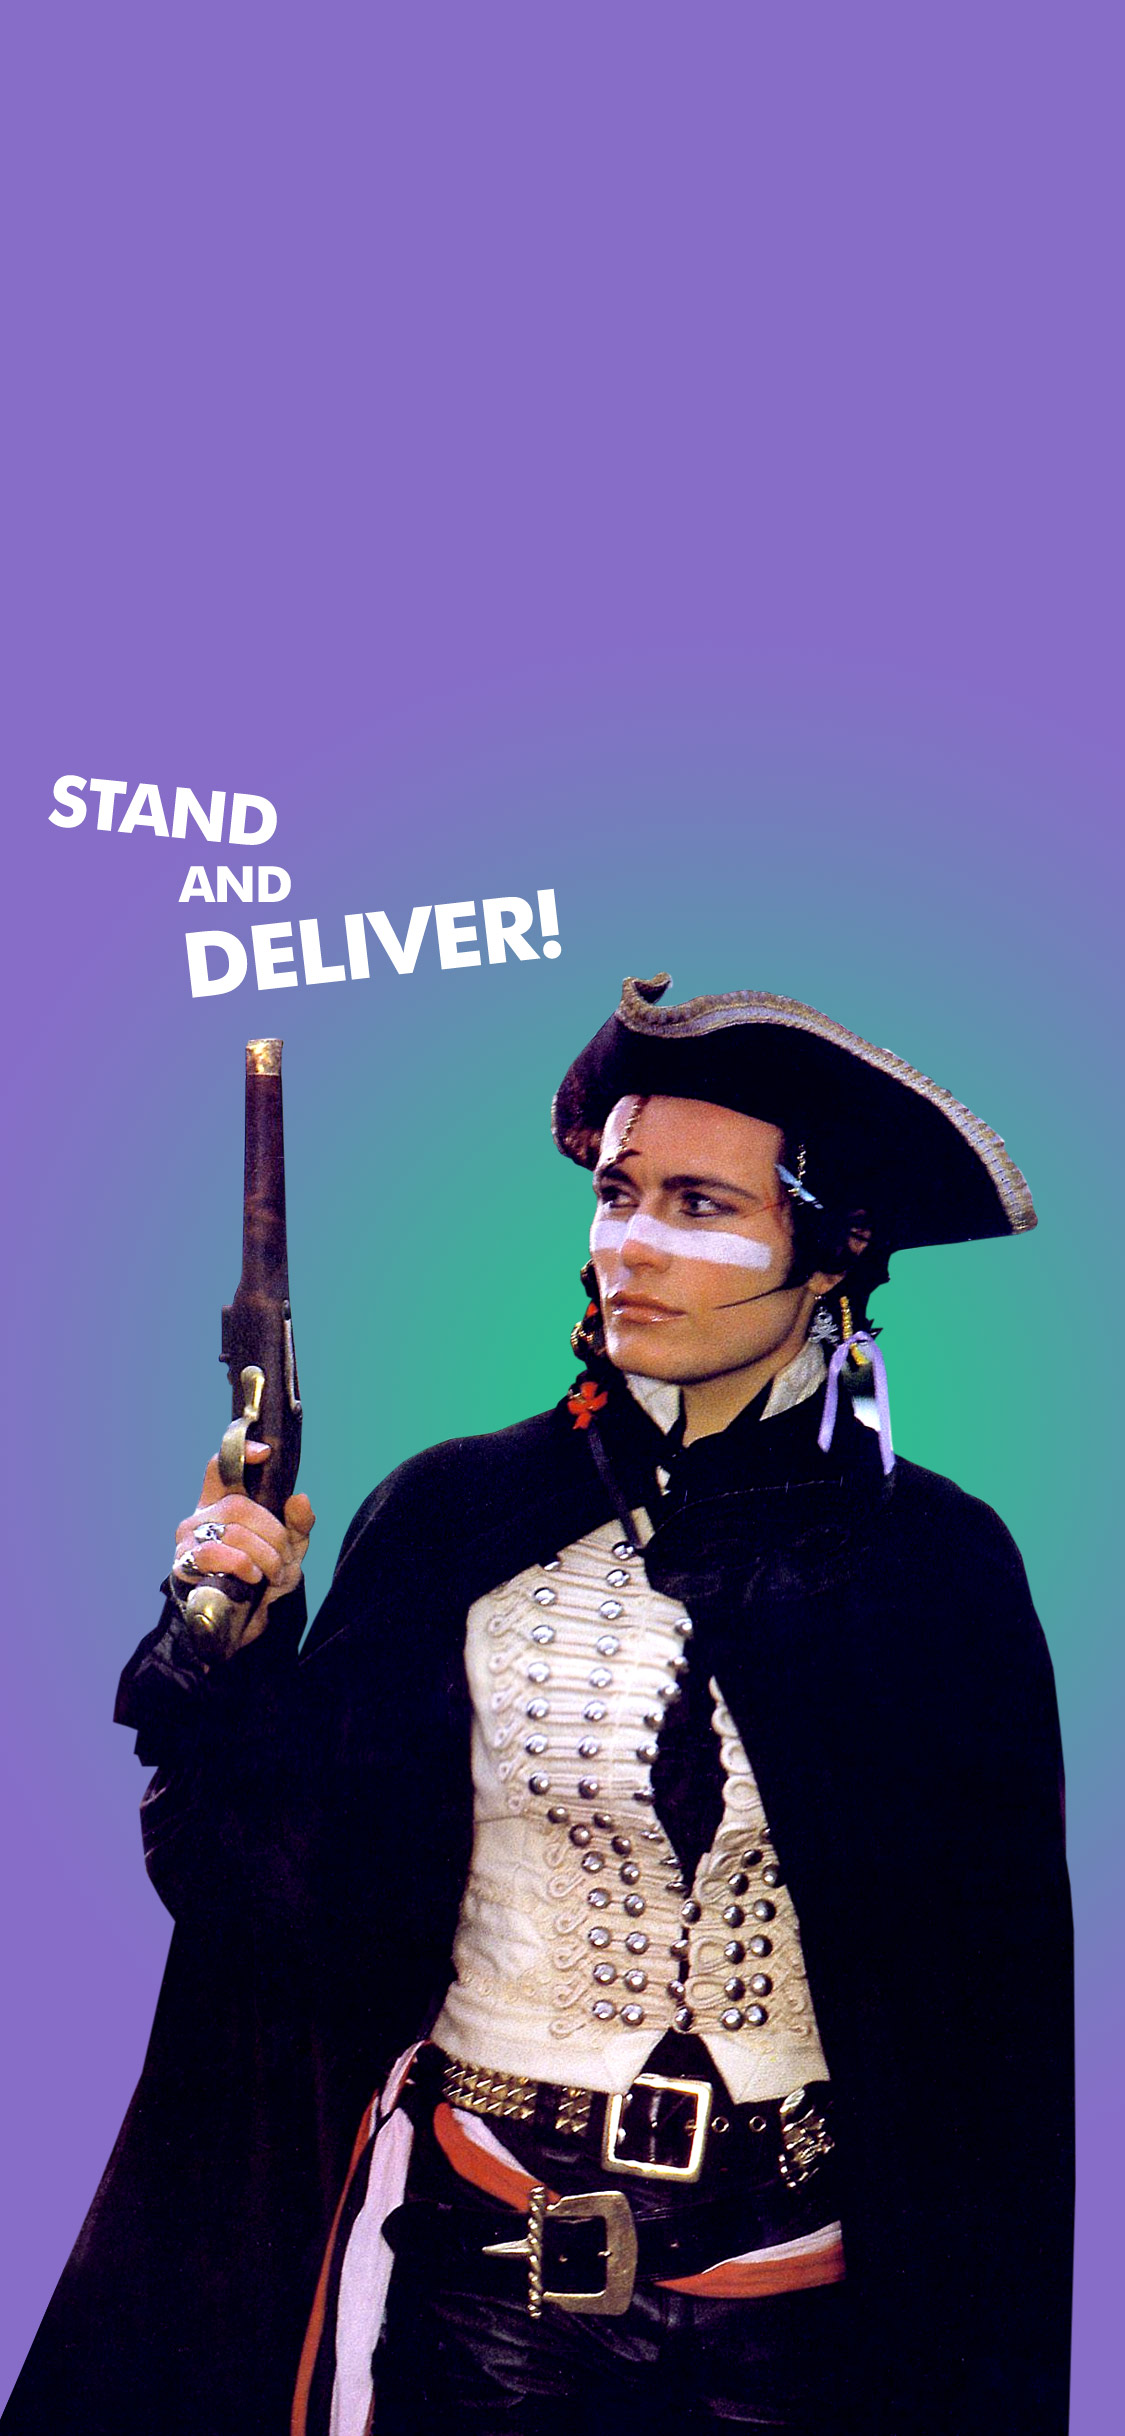 phone wallpaper displaying adam ant // stand and deliver